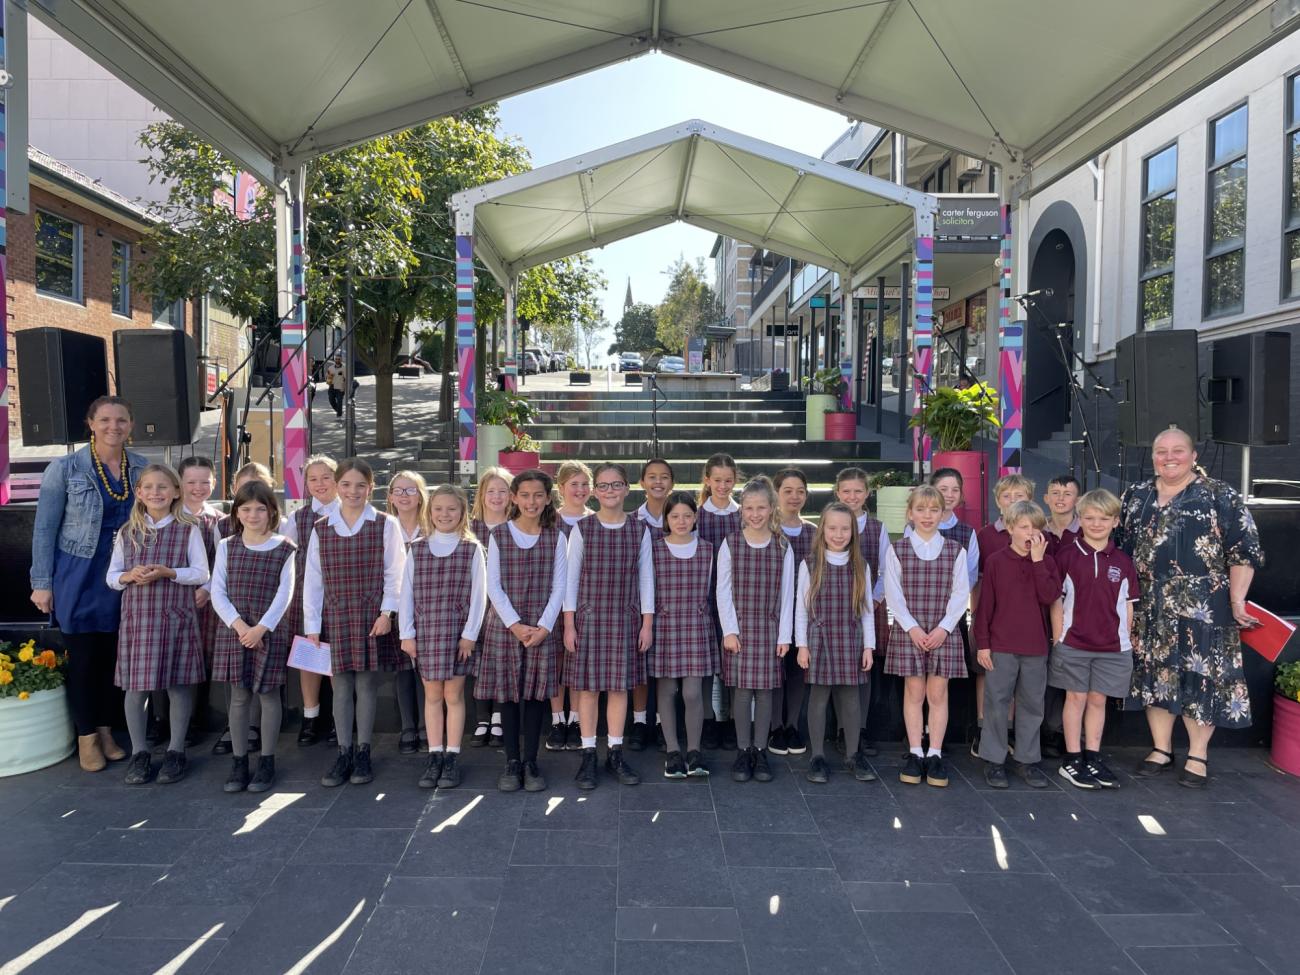 Austinmer Public School Choir standing in front of the stage in school uniform for photo